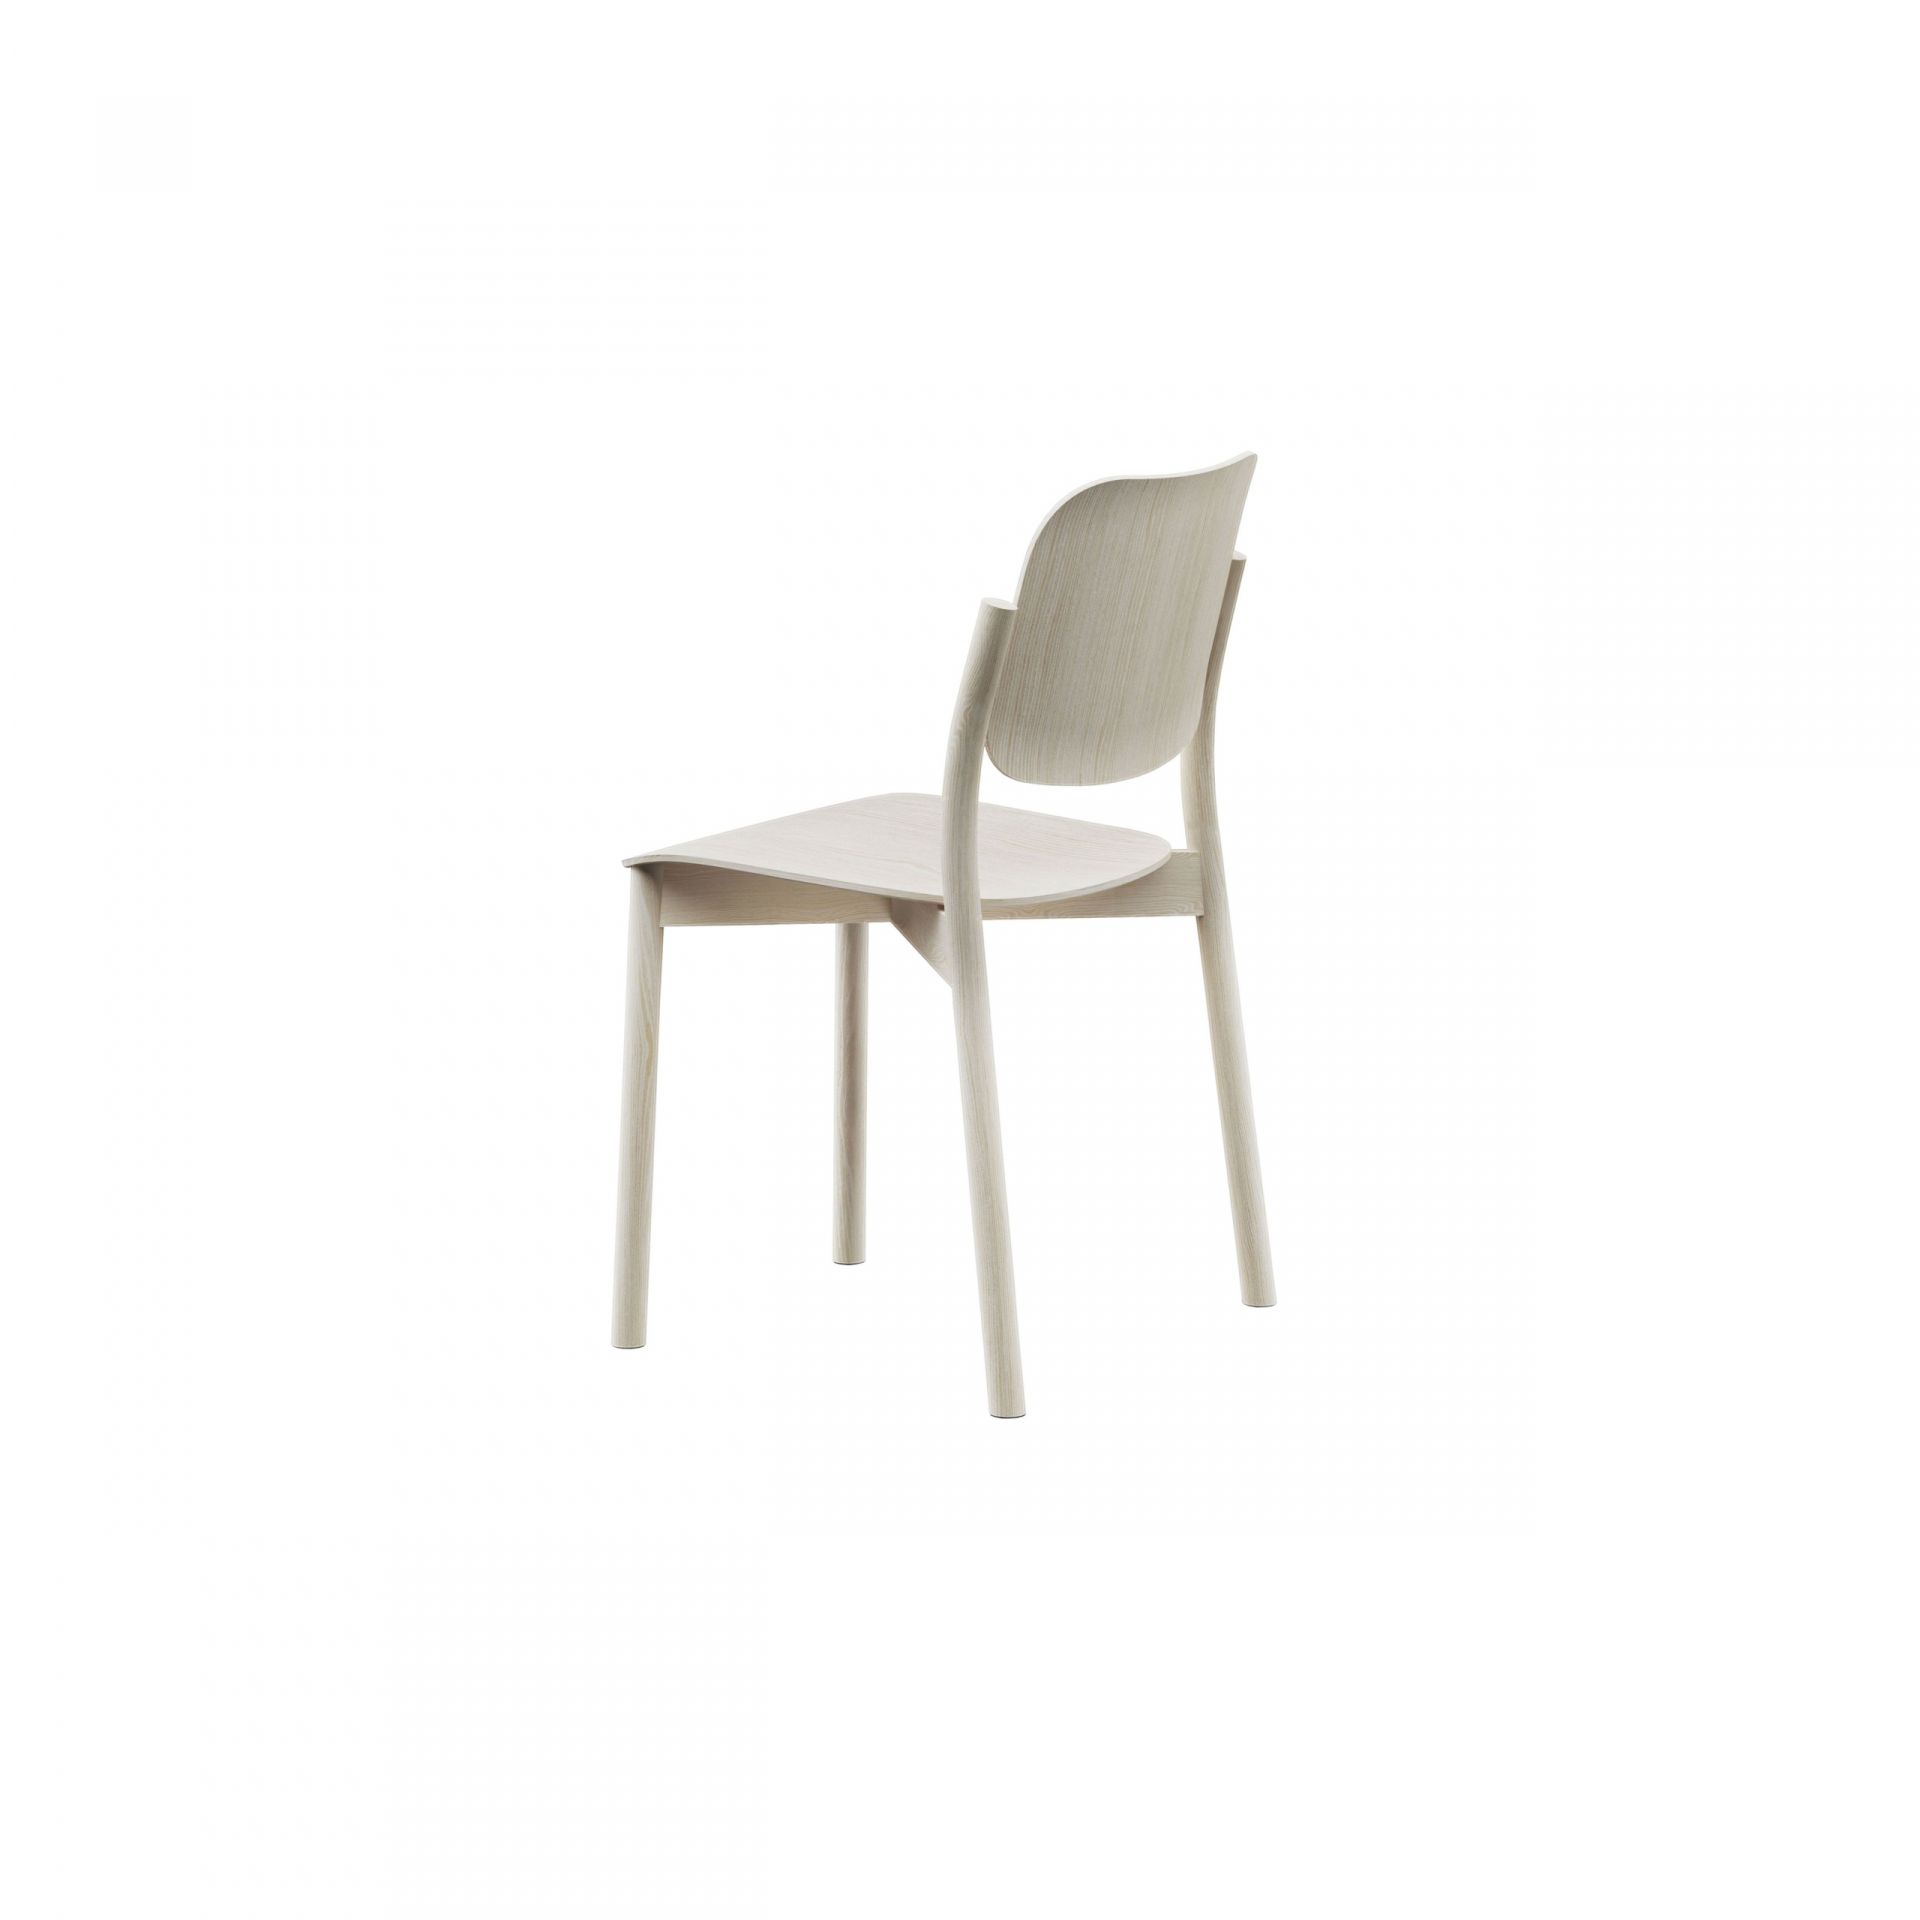 Zoe Wooden chair product image 4